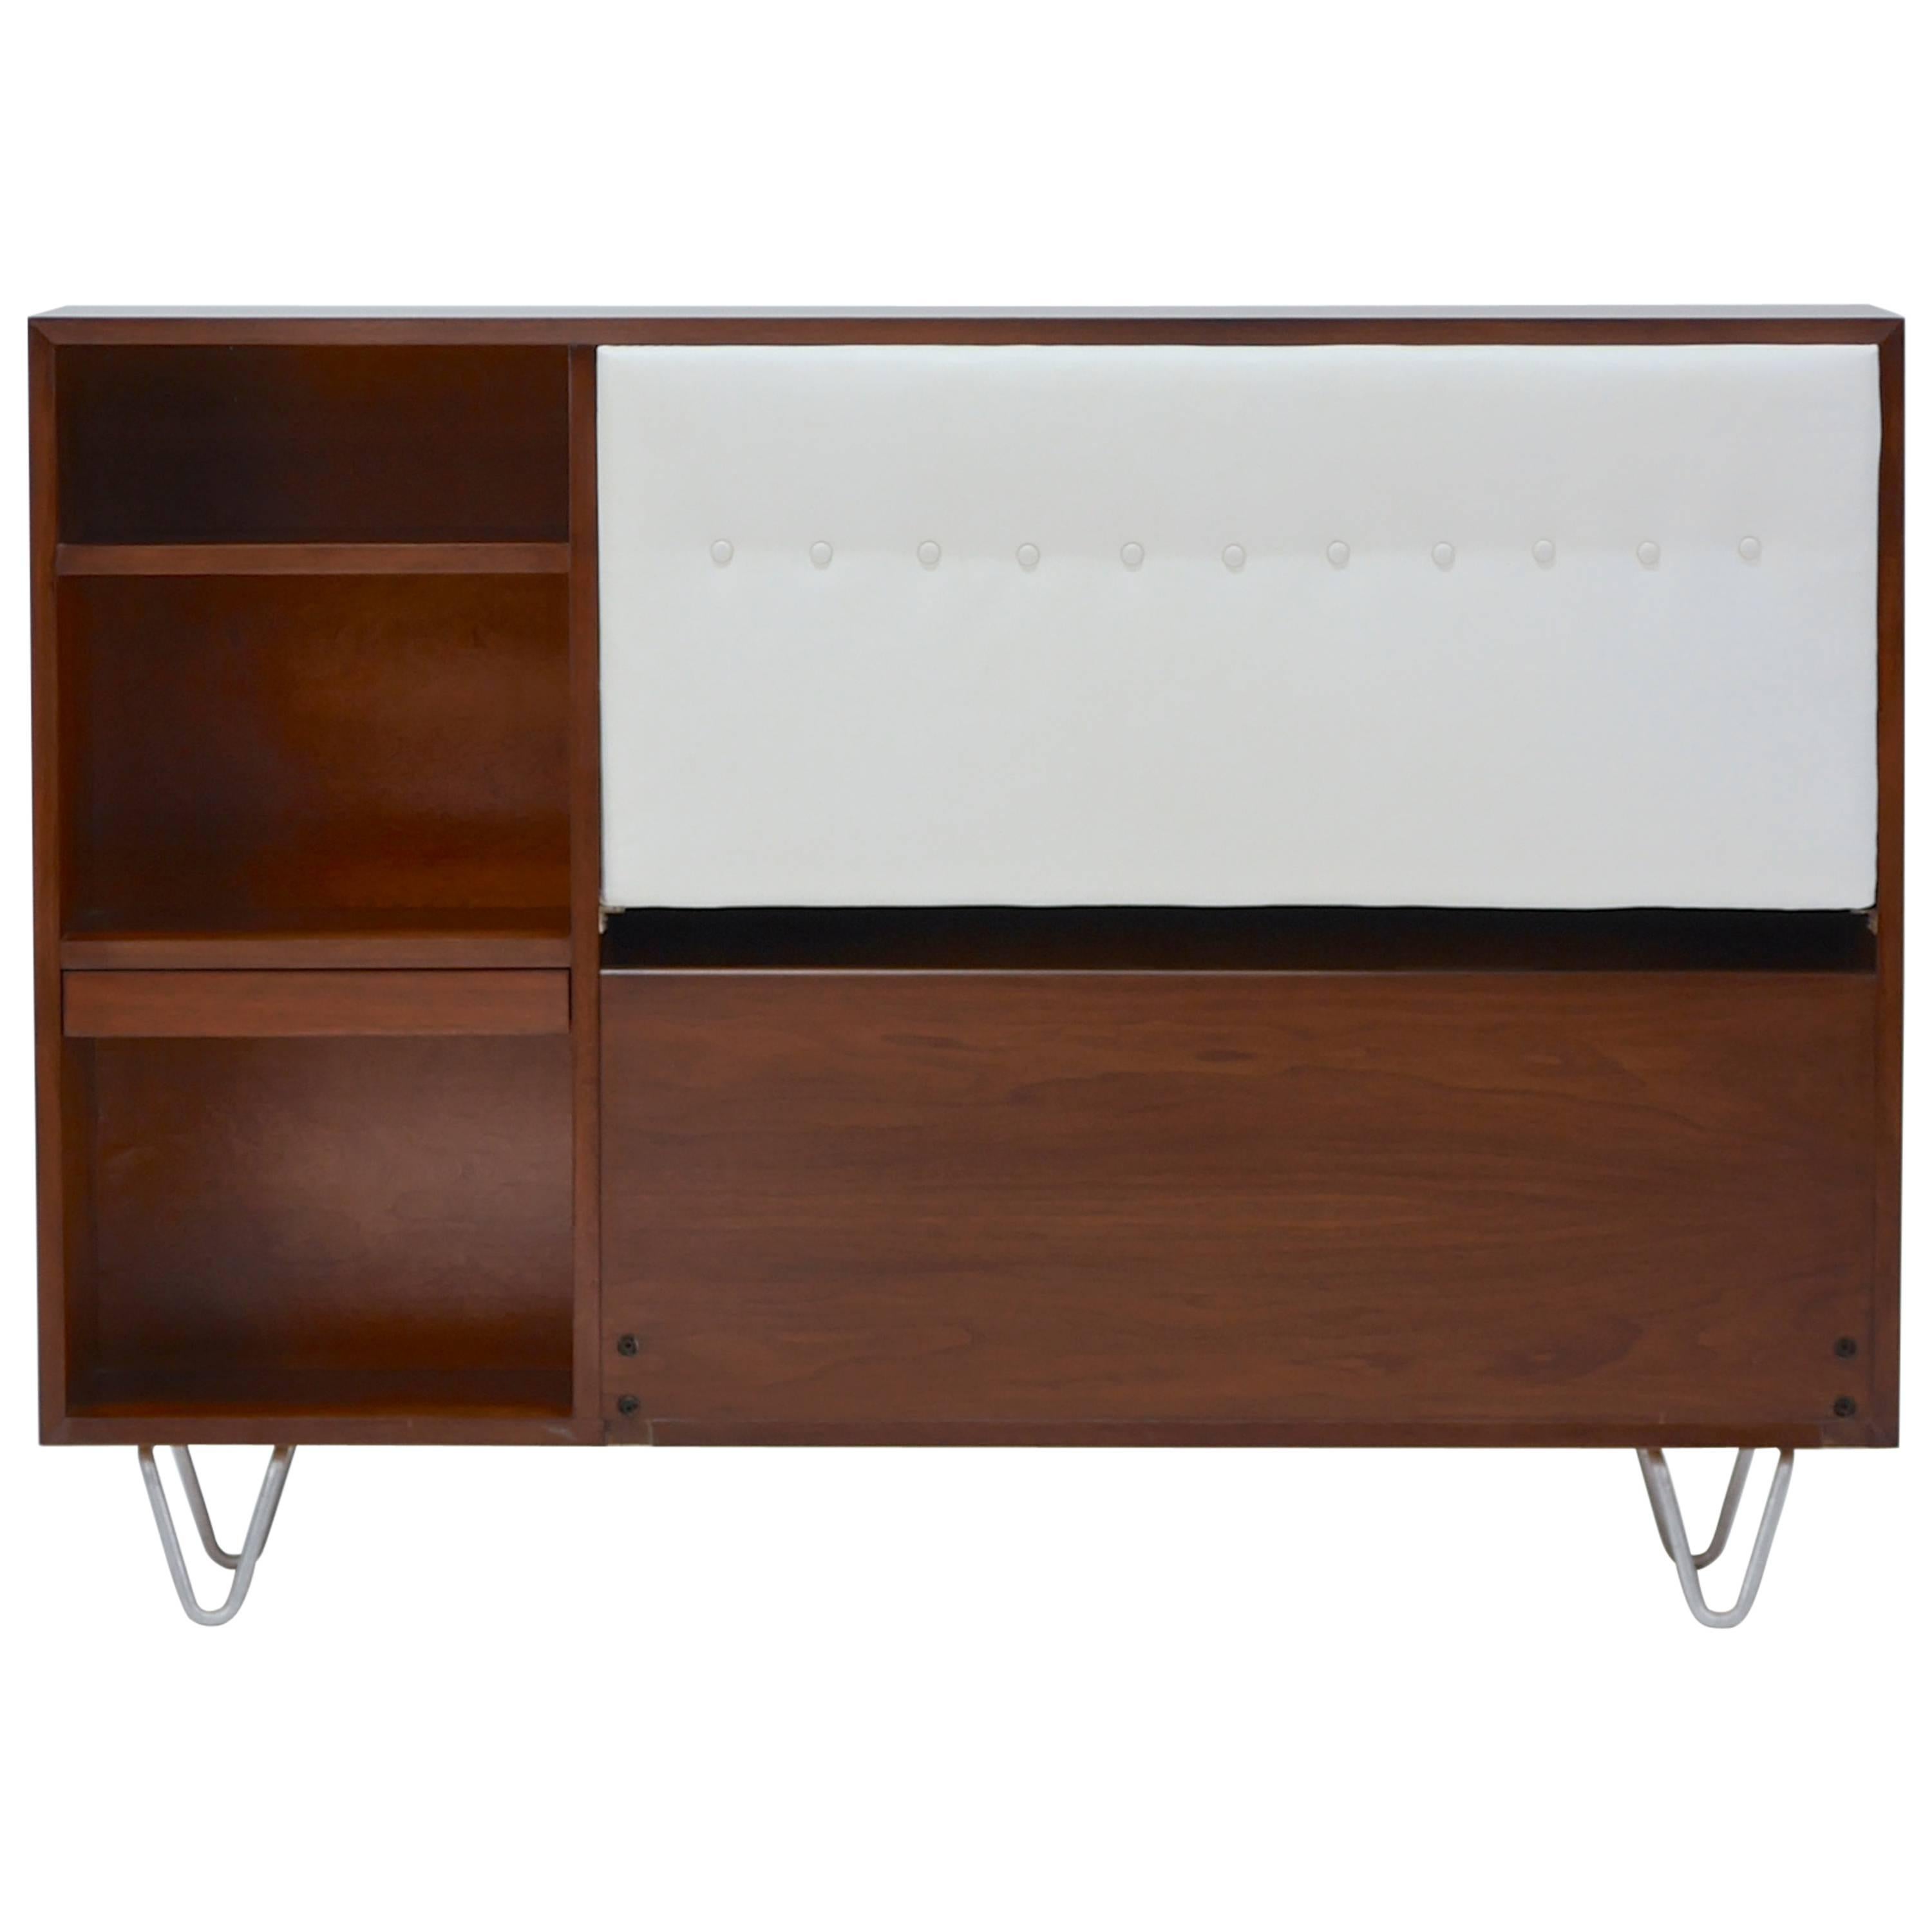 King-size headboard in walnut on hairpin legs by George Nelson for Herman Miller. Recent professional restoration. Features two adjustable pull-out shelves for convenience. The top can be opened and offers storage space for additional bedding,